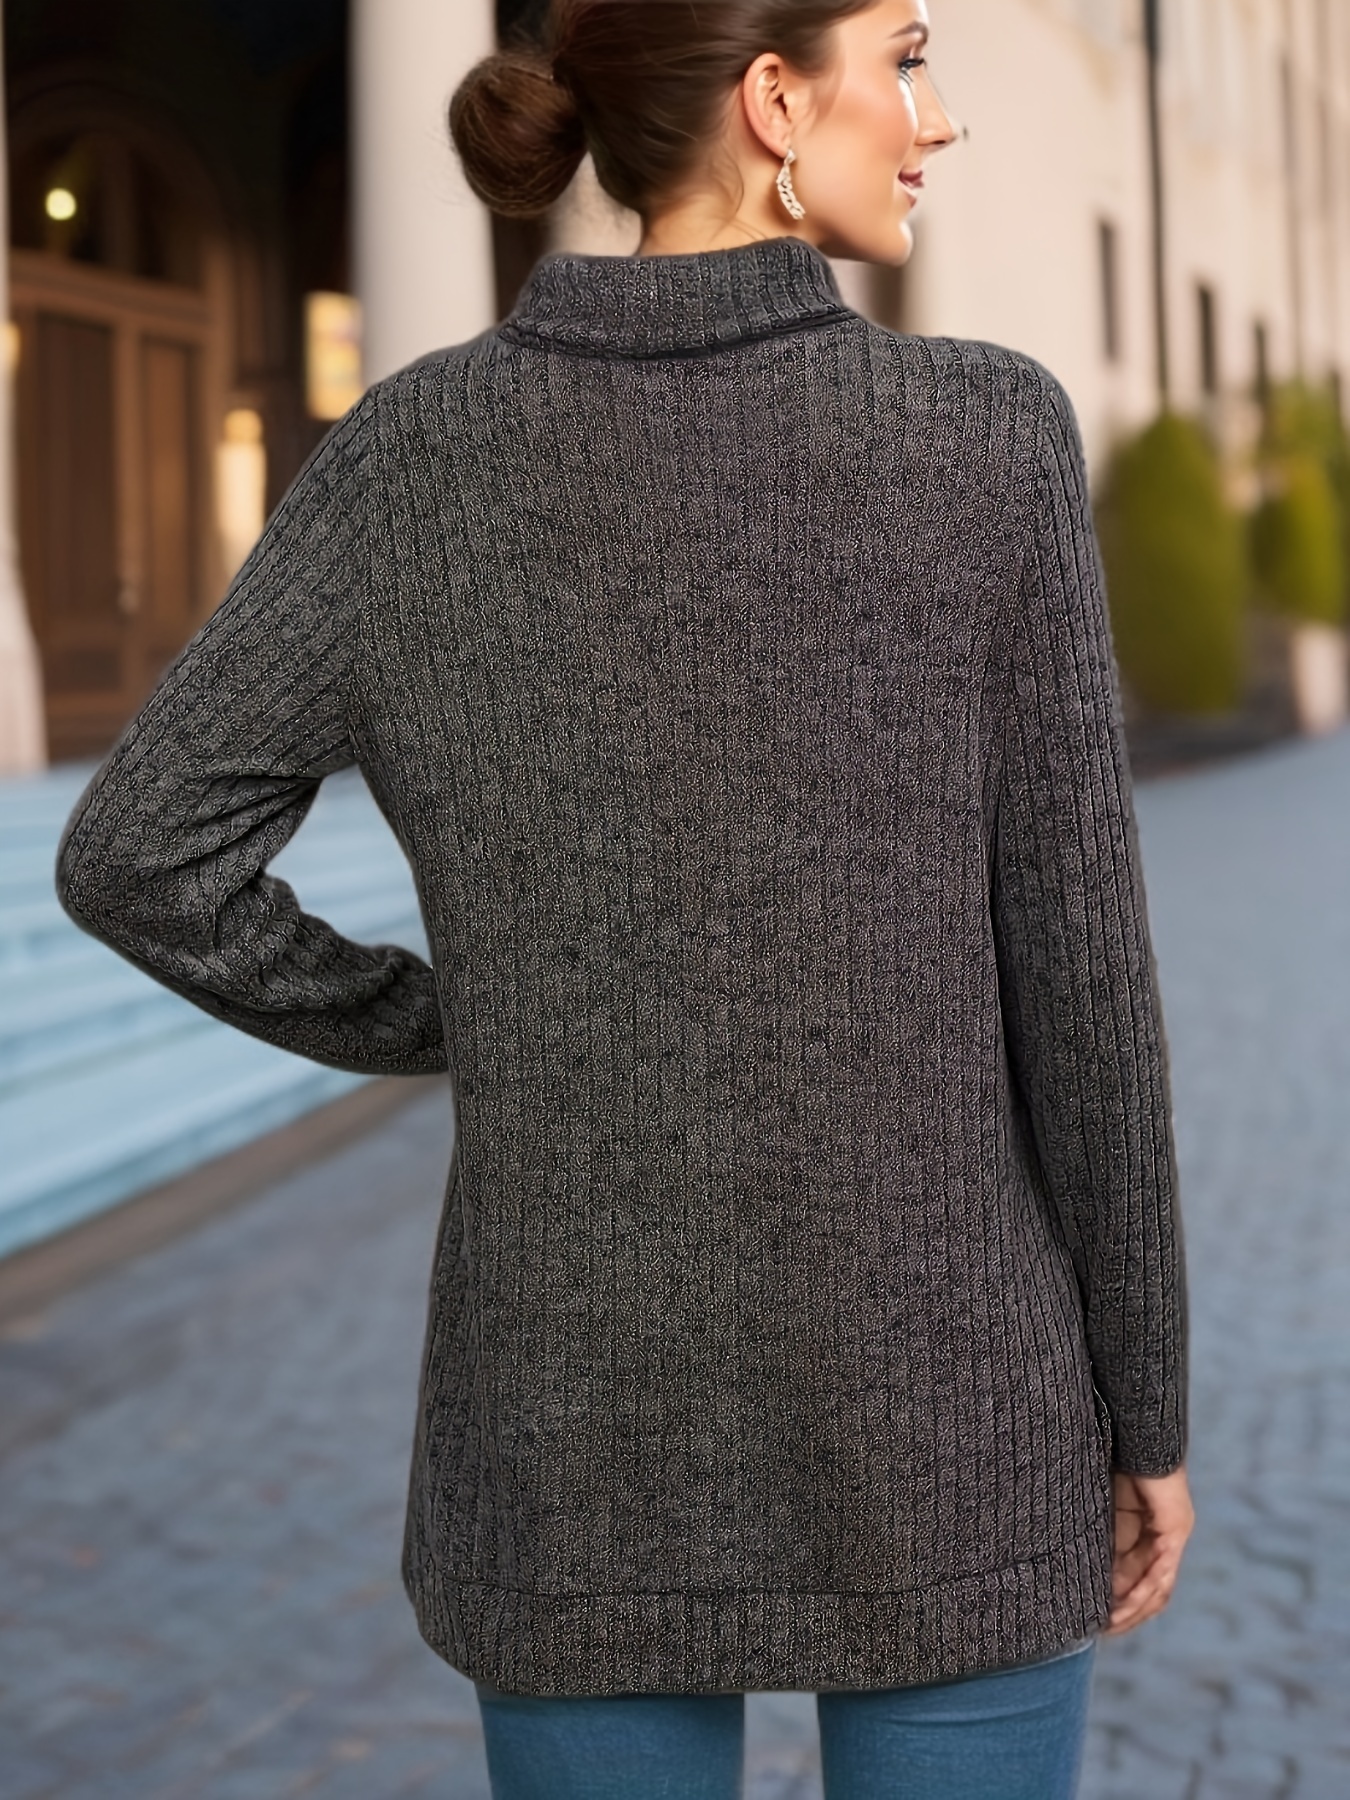 RIBBED KNIT SWEATER WITH HIGH NECK - Grey